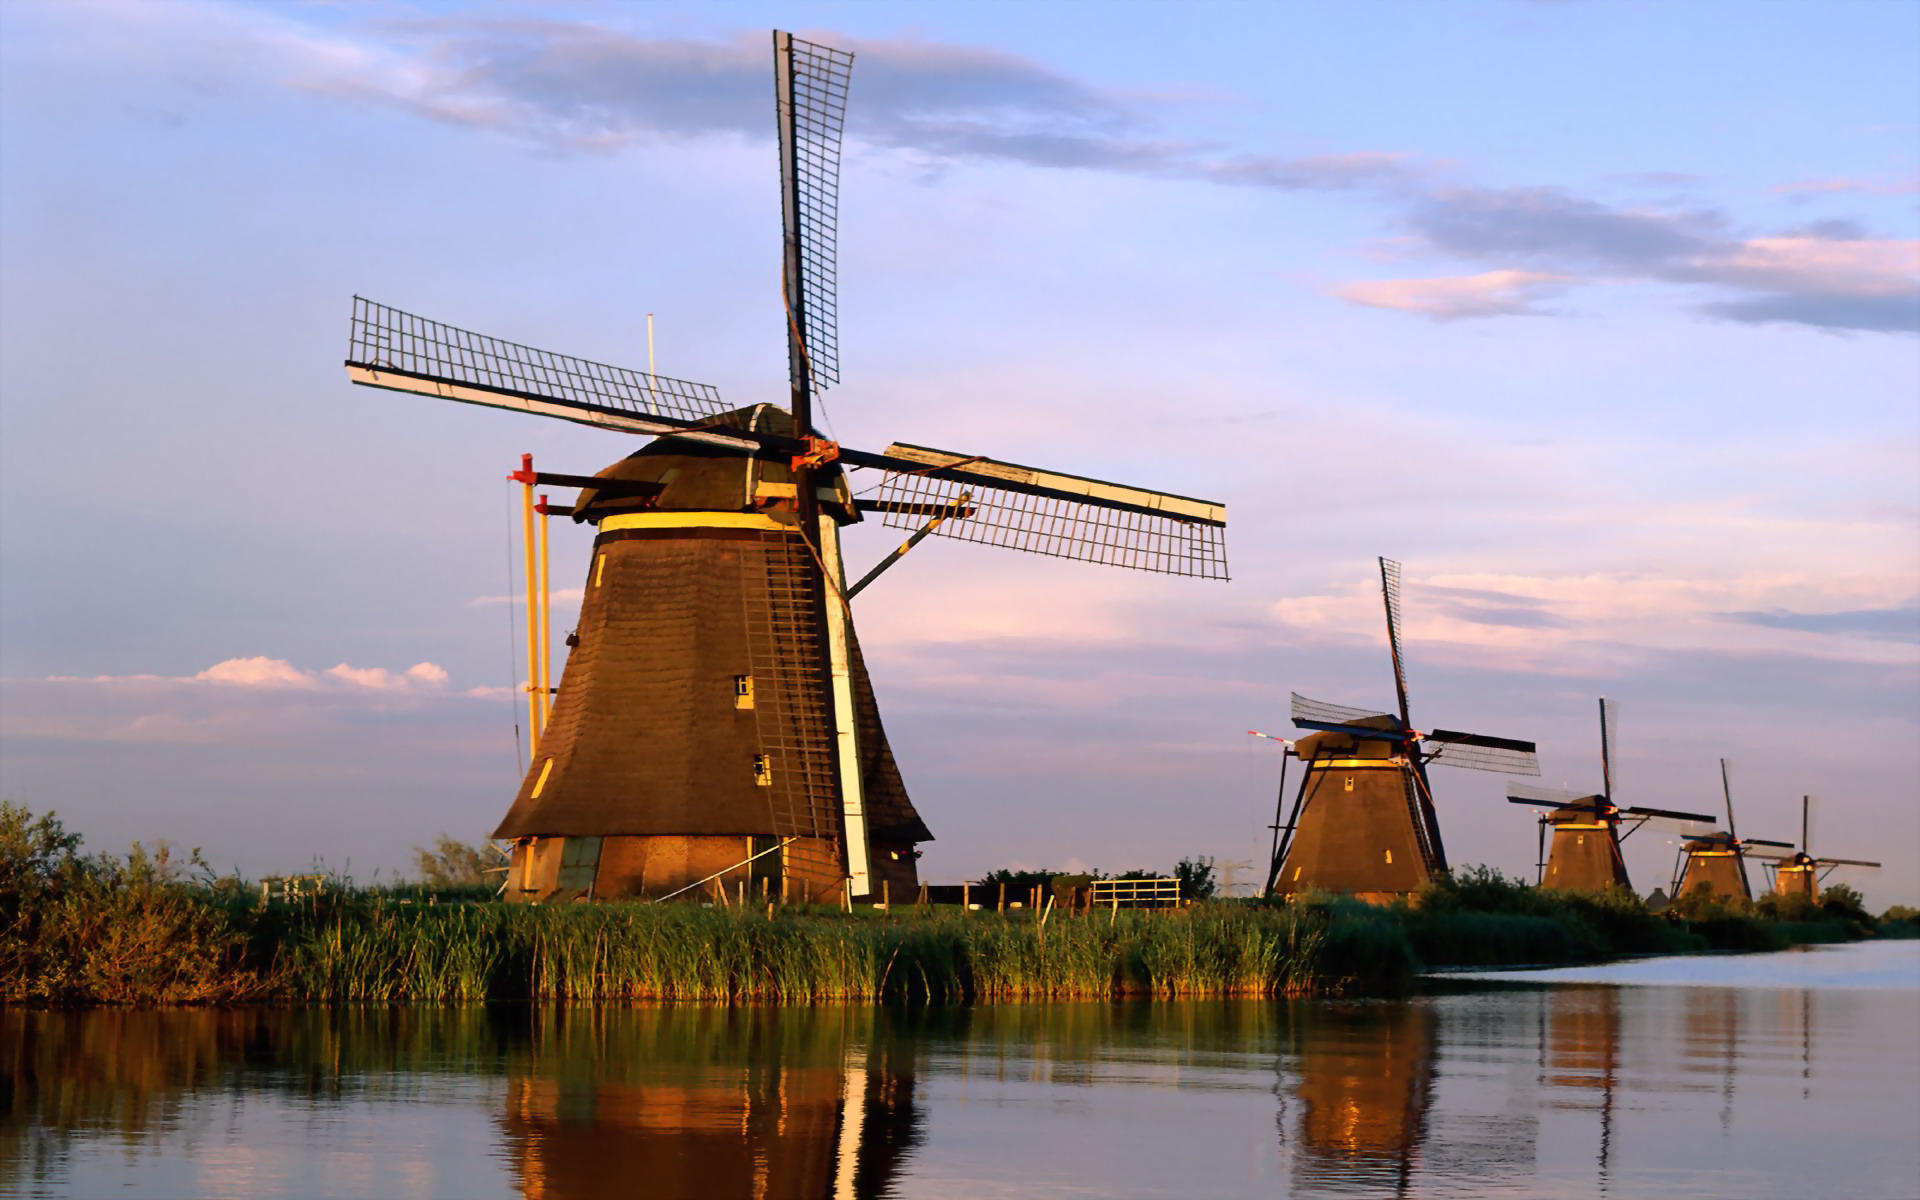 Holland Wallpapers | Best Wallpapers